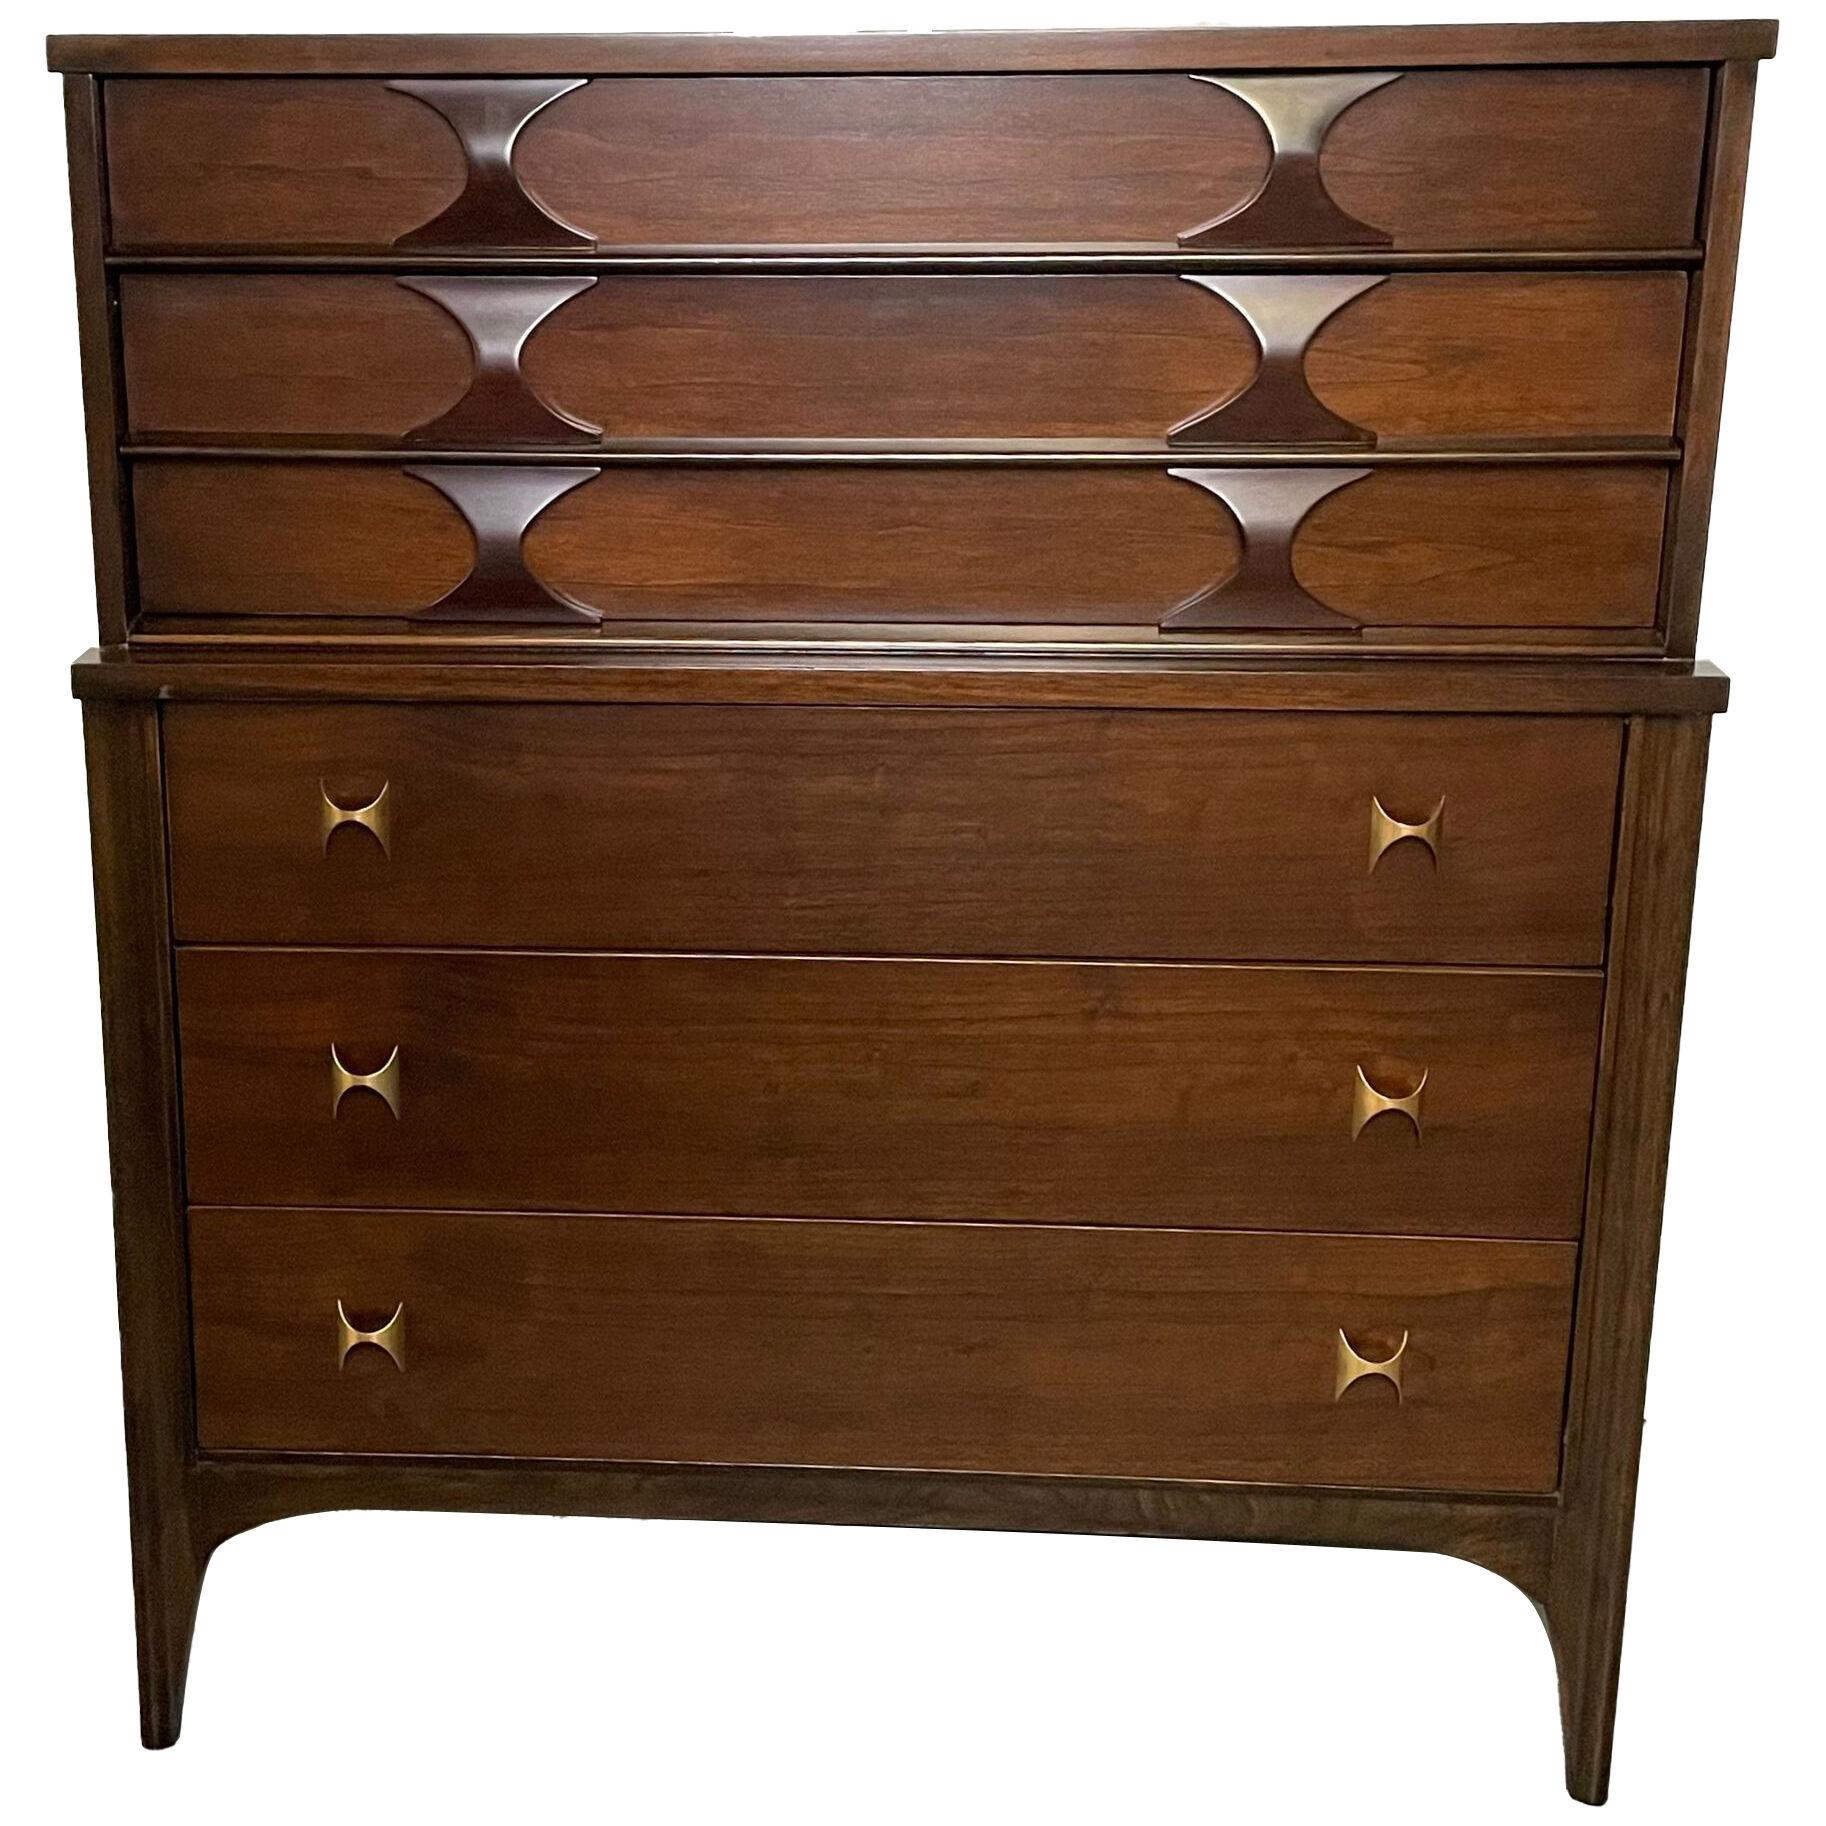 A Mid Century Modern Chest, Dresser, Kent Coffey, Fully Refinished.